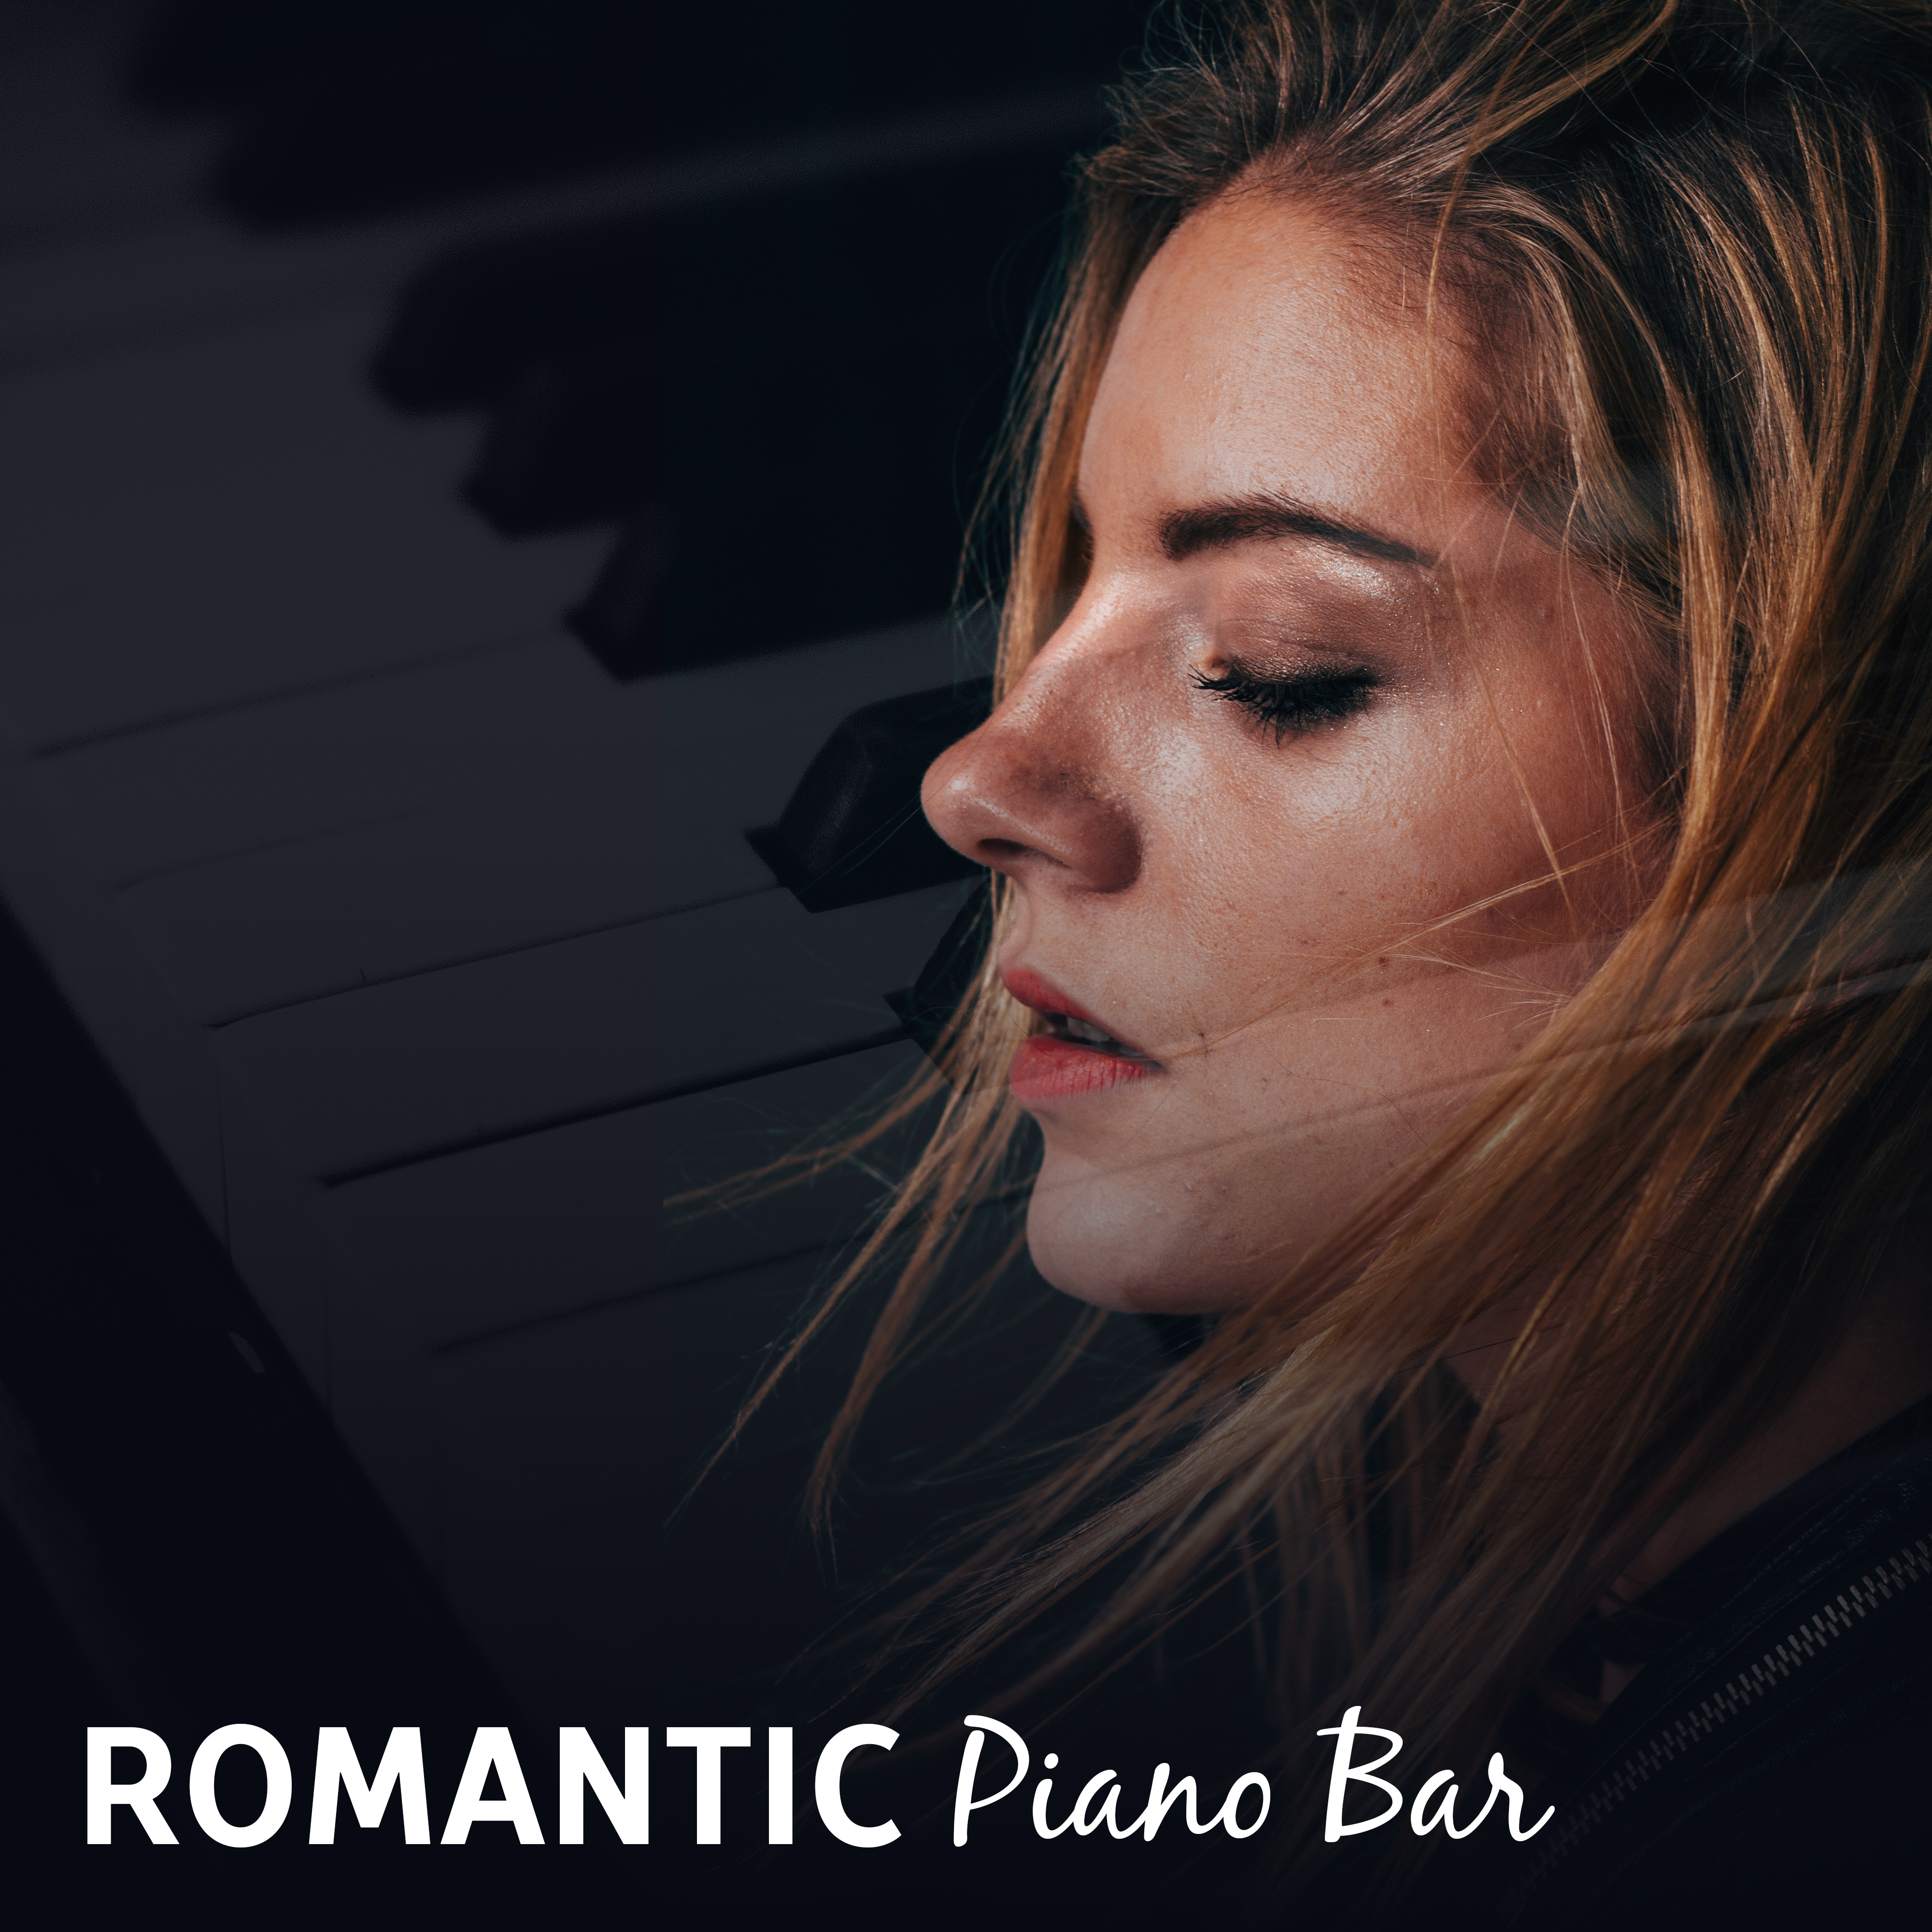 Romantic Piano Bar  Restaurant Music, Chilled Jazz, Cocktail Party, Dinner with Family, Jazz Cafe, Relaxing Music